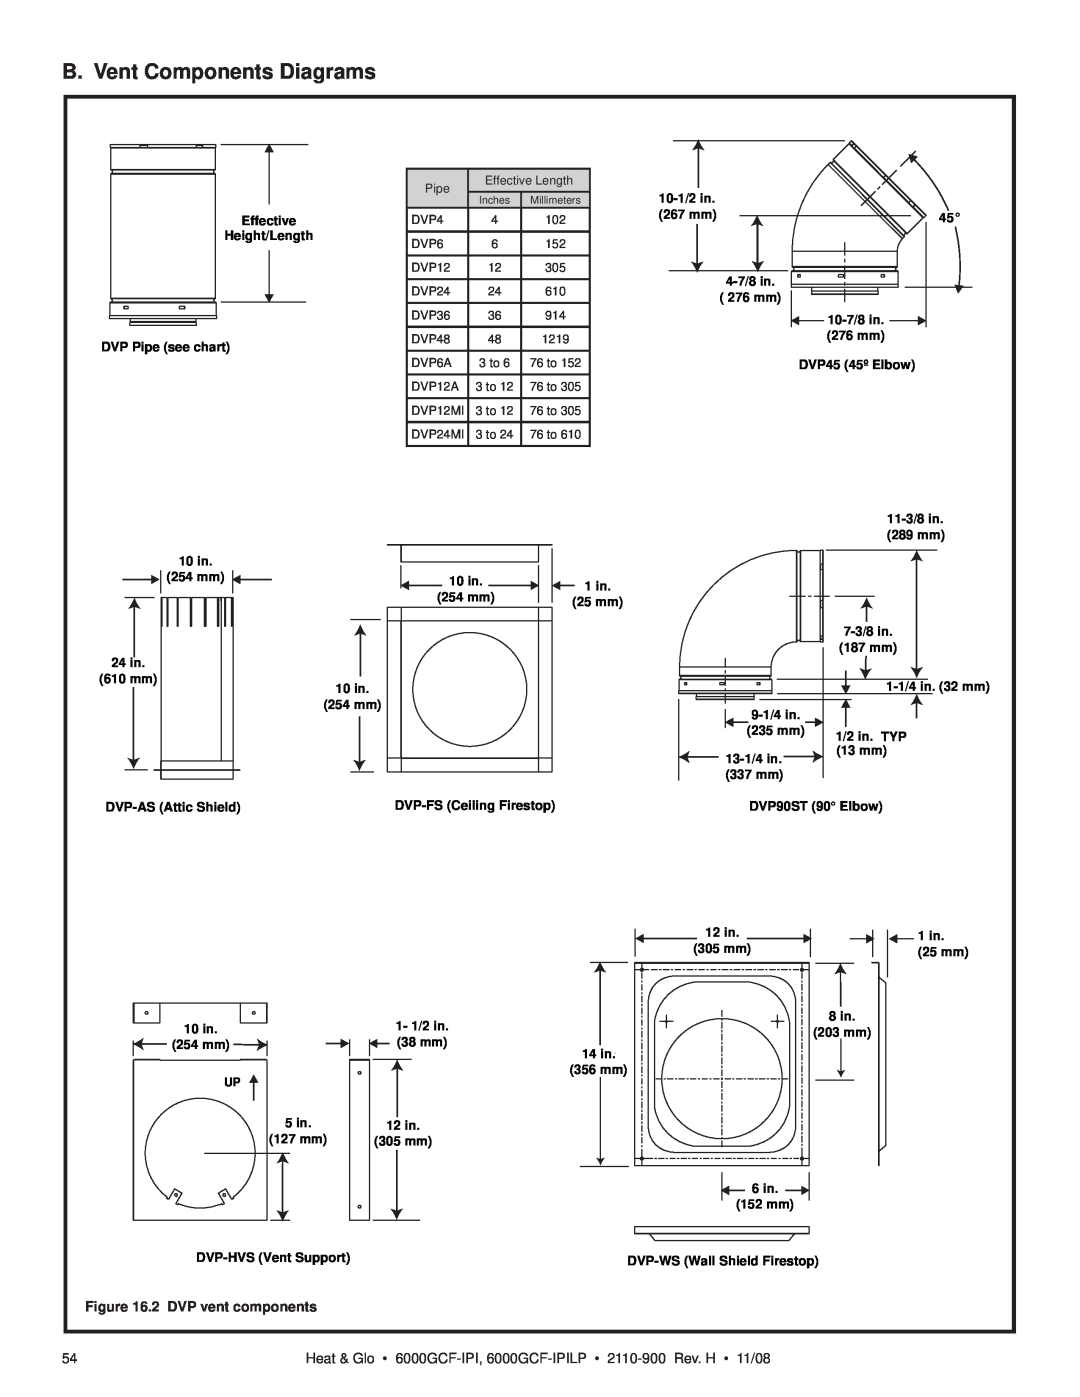 Hearth and Home Technologies 6000GCF-IPIL owner manual B. Vent Components Diagrams, 2 DVP vent components 